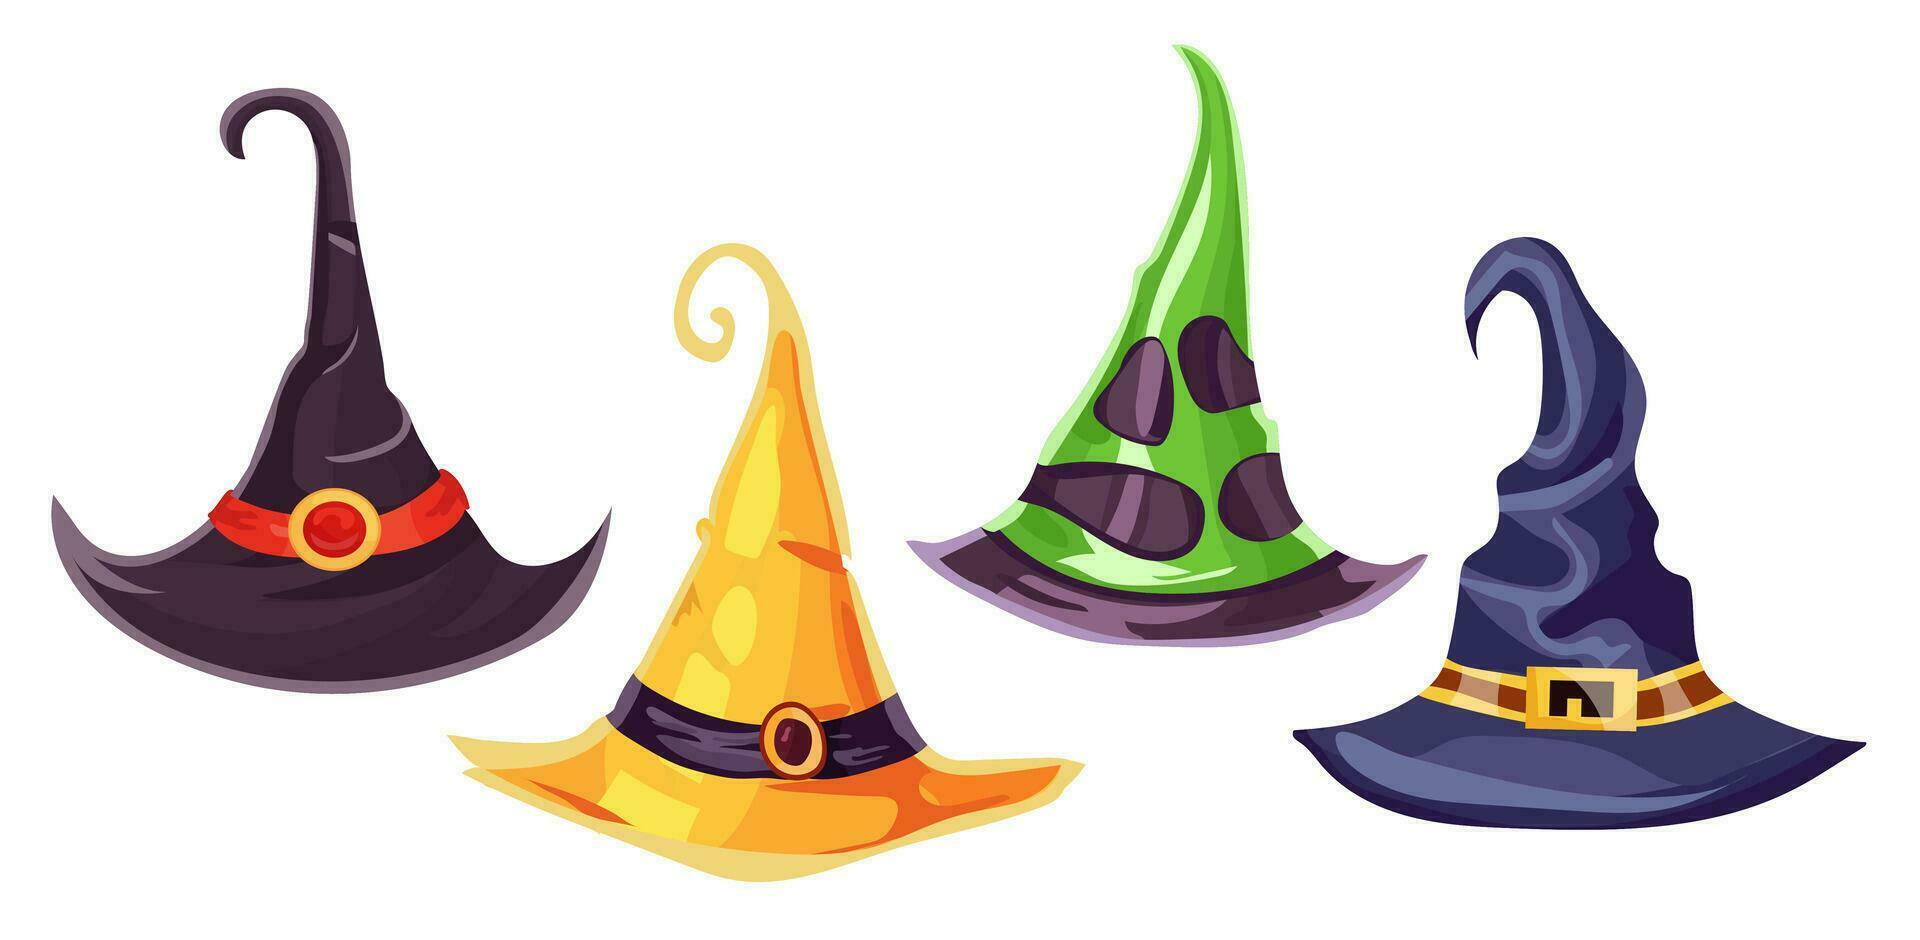 Bright set of witch hats, illustration. Vector. Halloween, event, holiday. Witch. Accessory for witches, headdress. Witch hat, miscellaneous set. Cartoon style, color illustration vector